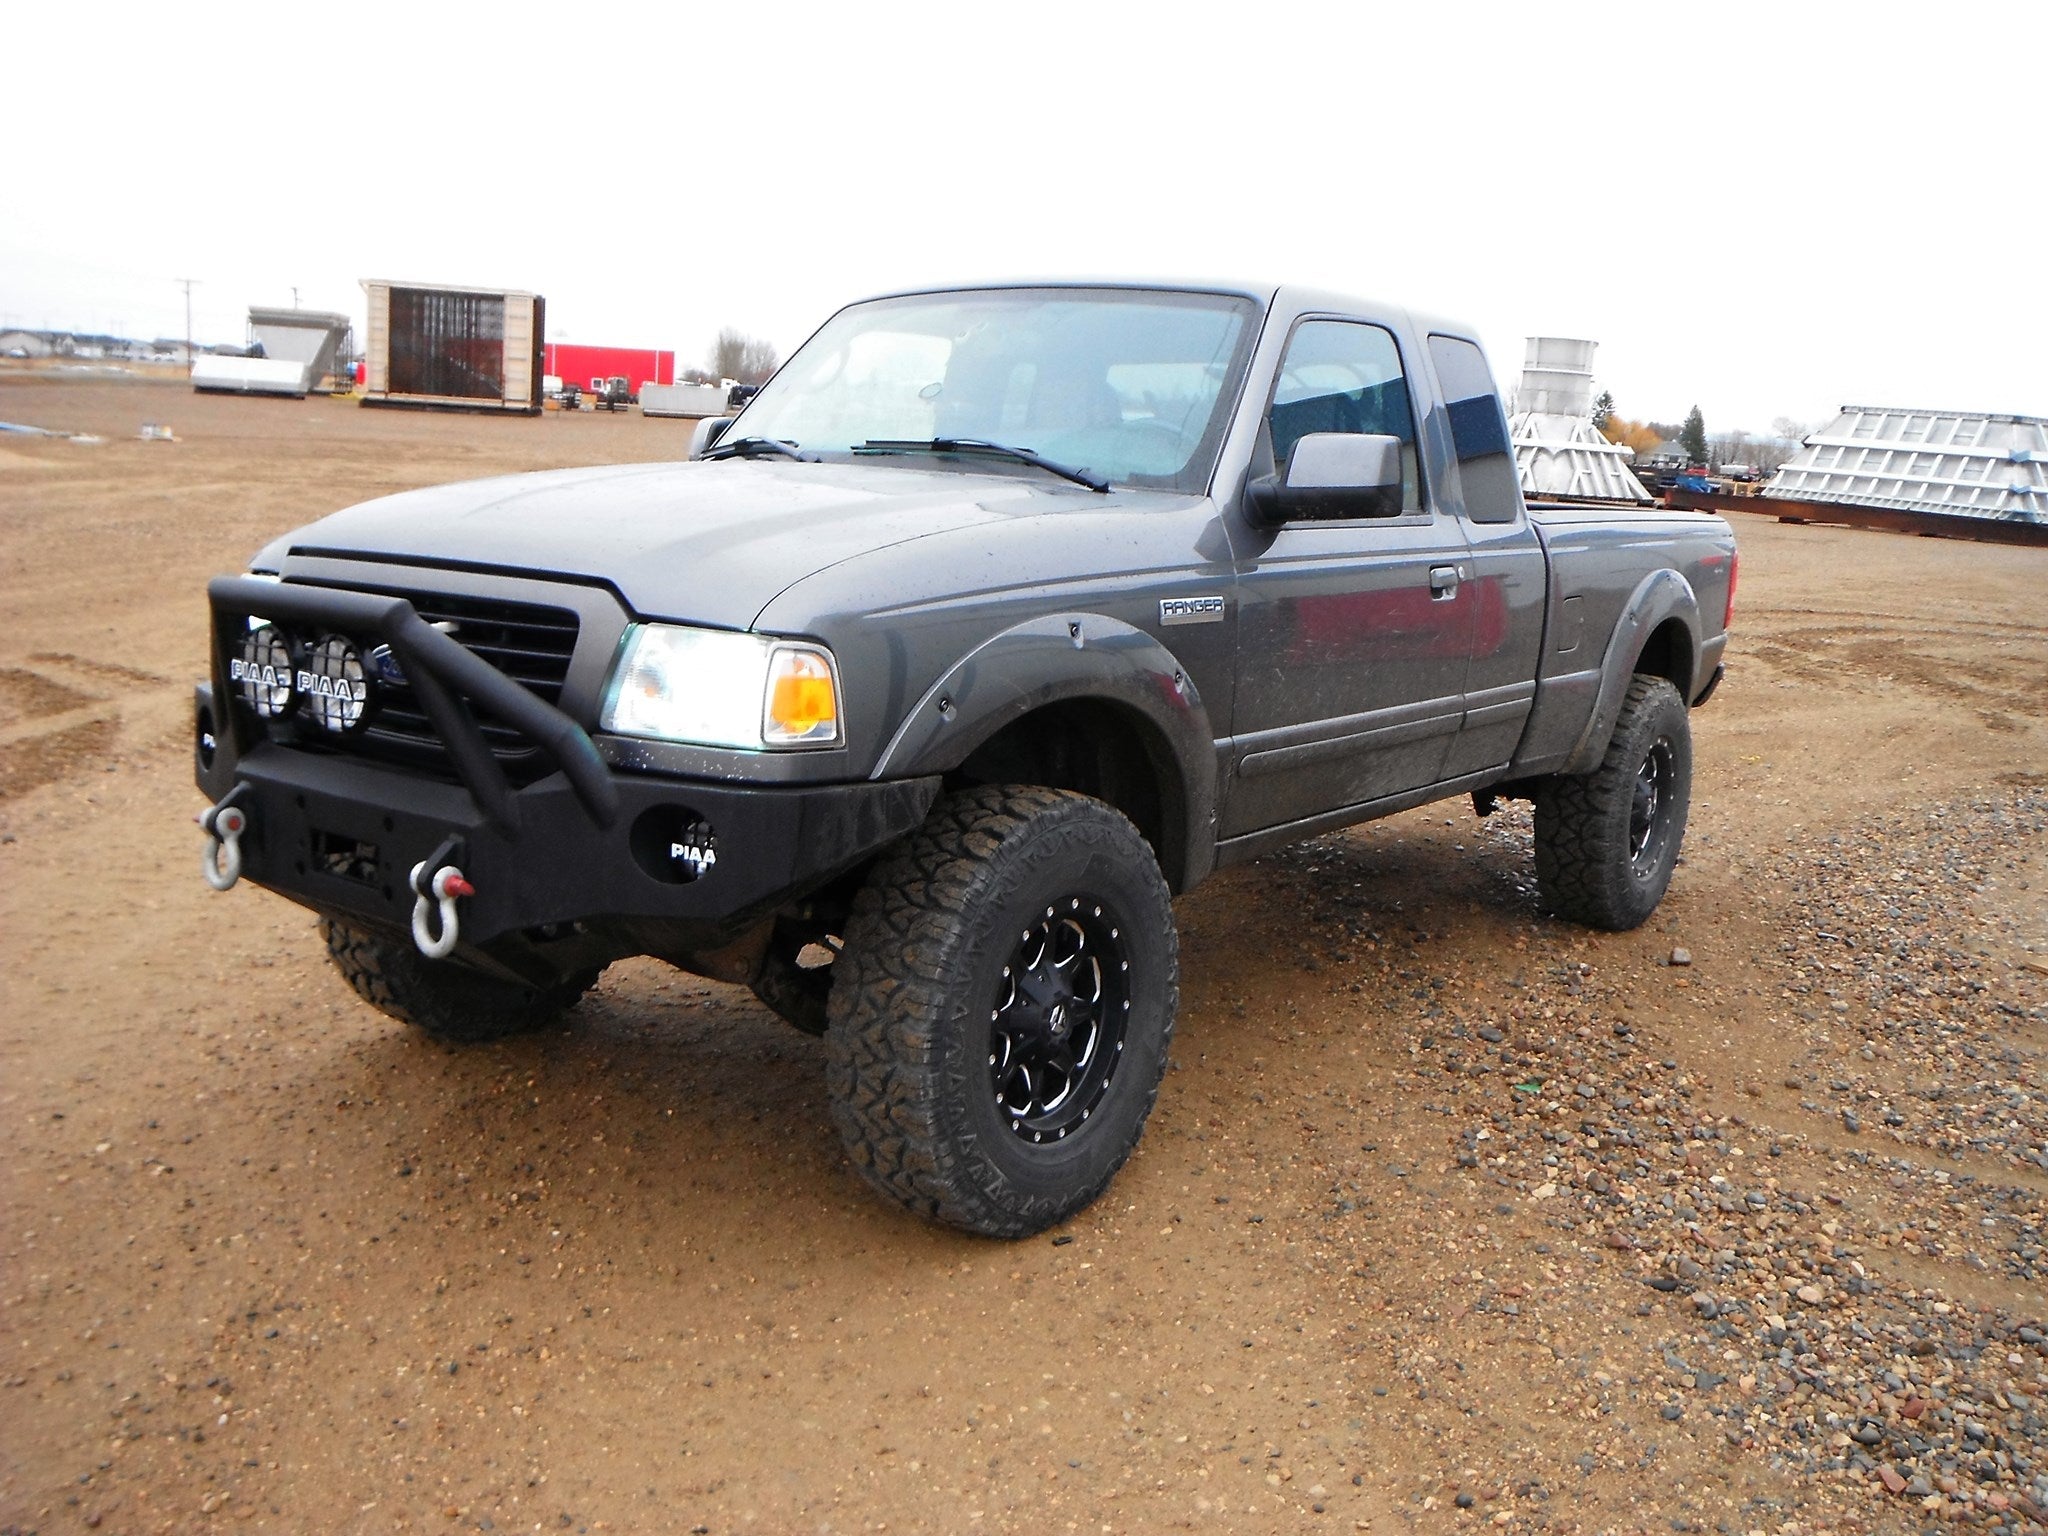 1998-2012 Ford Ranger Front Bumper - Iron Bull Bumpers